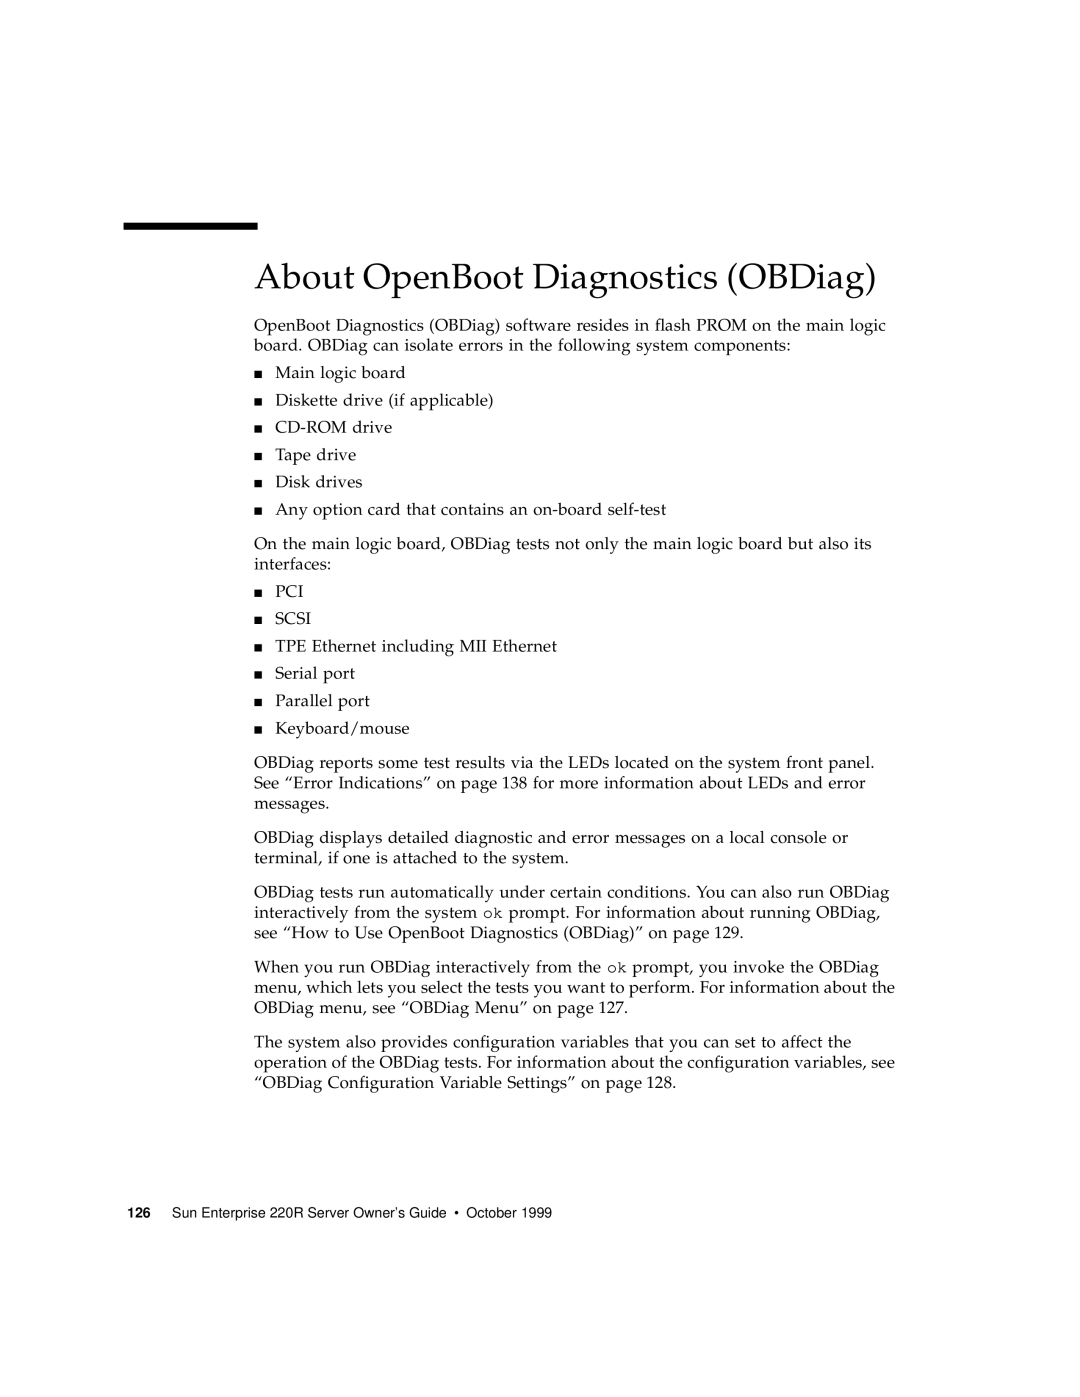 Sun Microsystems 220R manual About OpenBoot Diagnostics OBDiag 